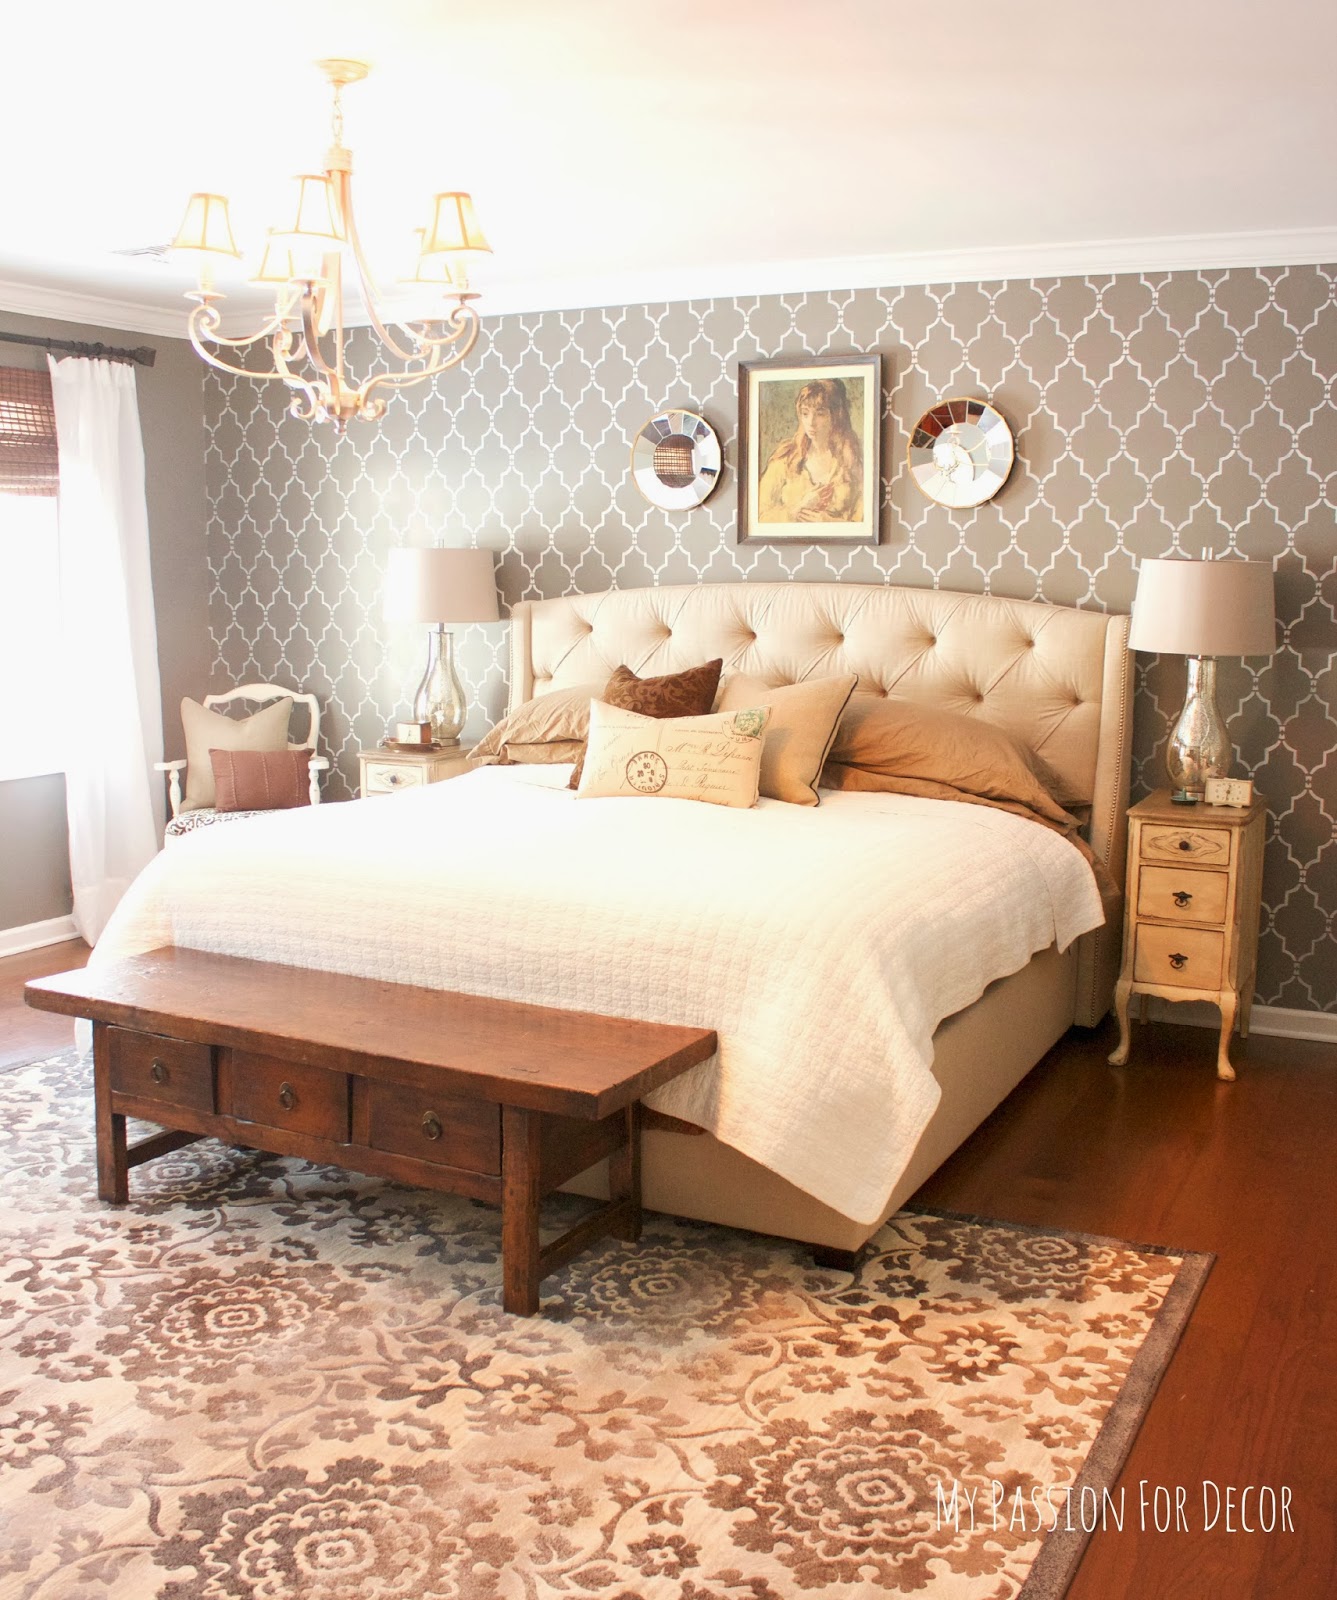 My Passion For Decor: Master Bedroom Makeover Using 